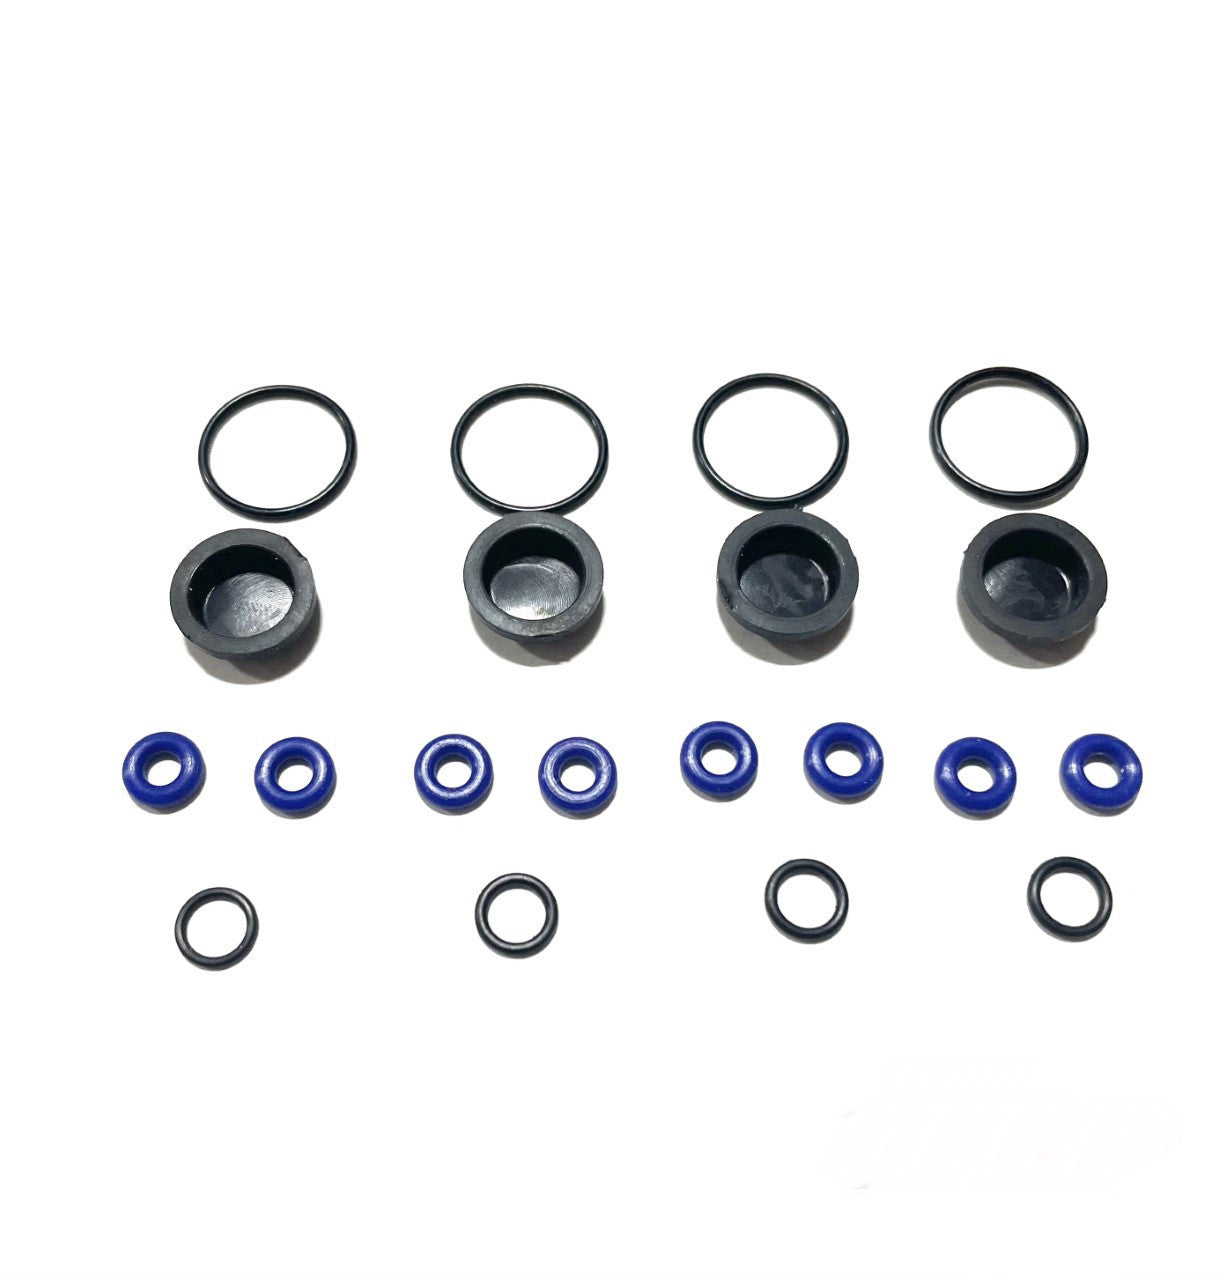 Small Bore Shock Rebuild Kit, fits all GFRP cars